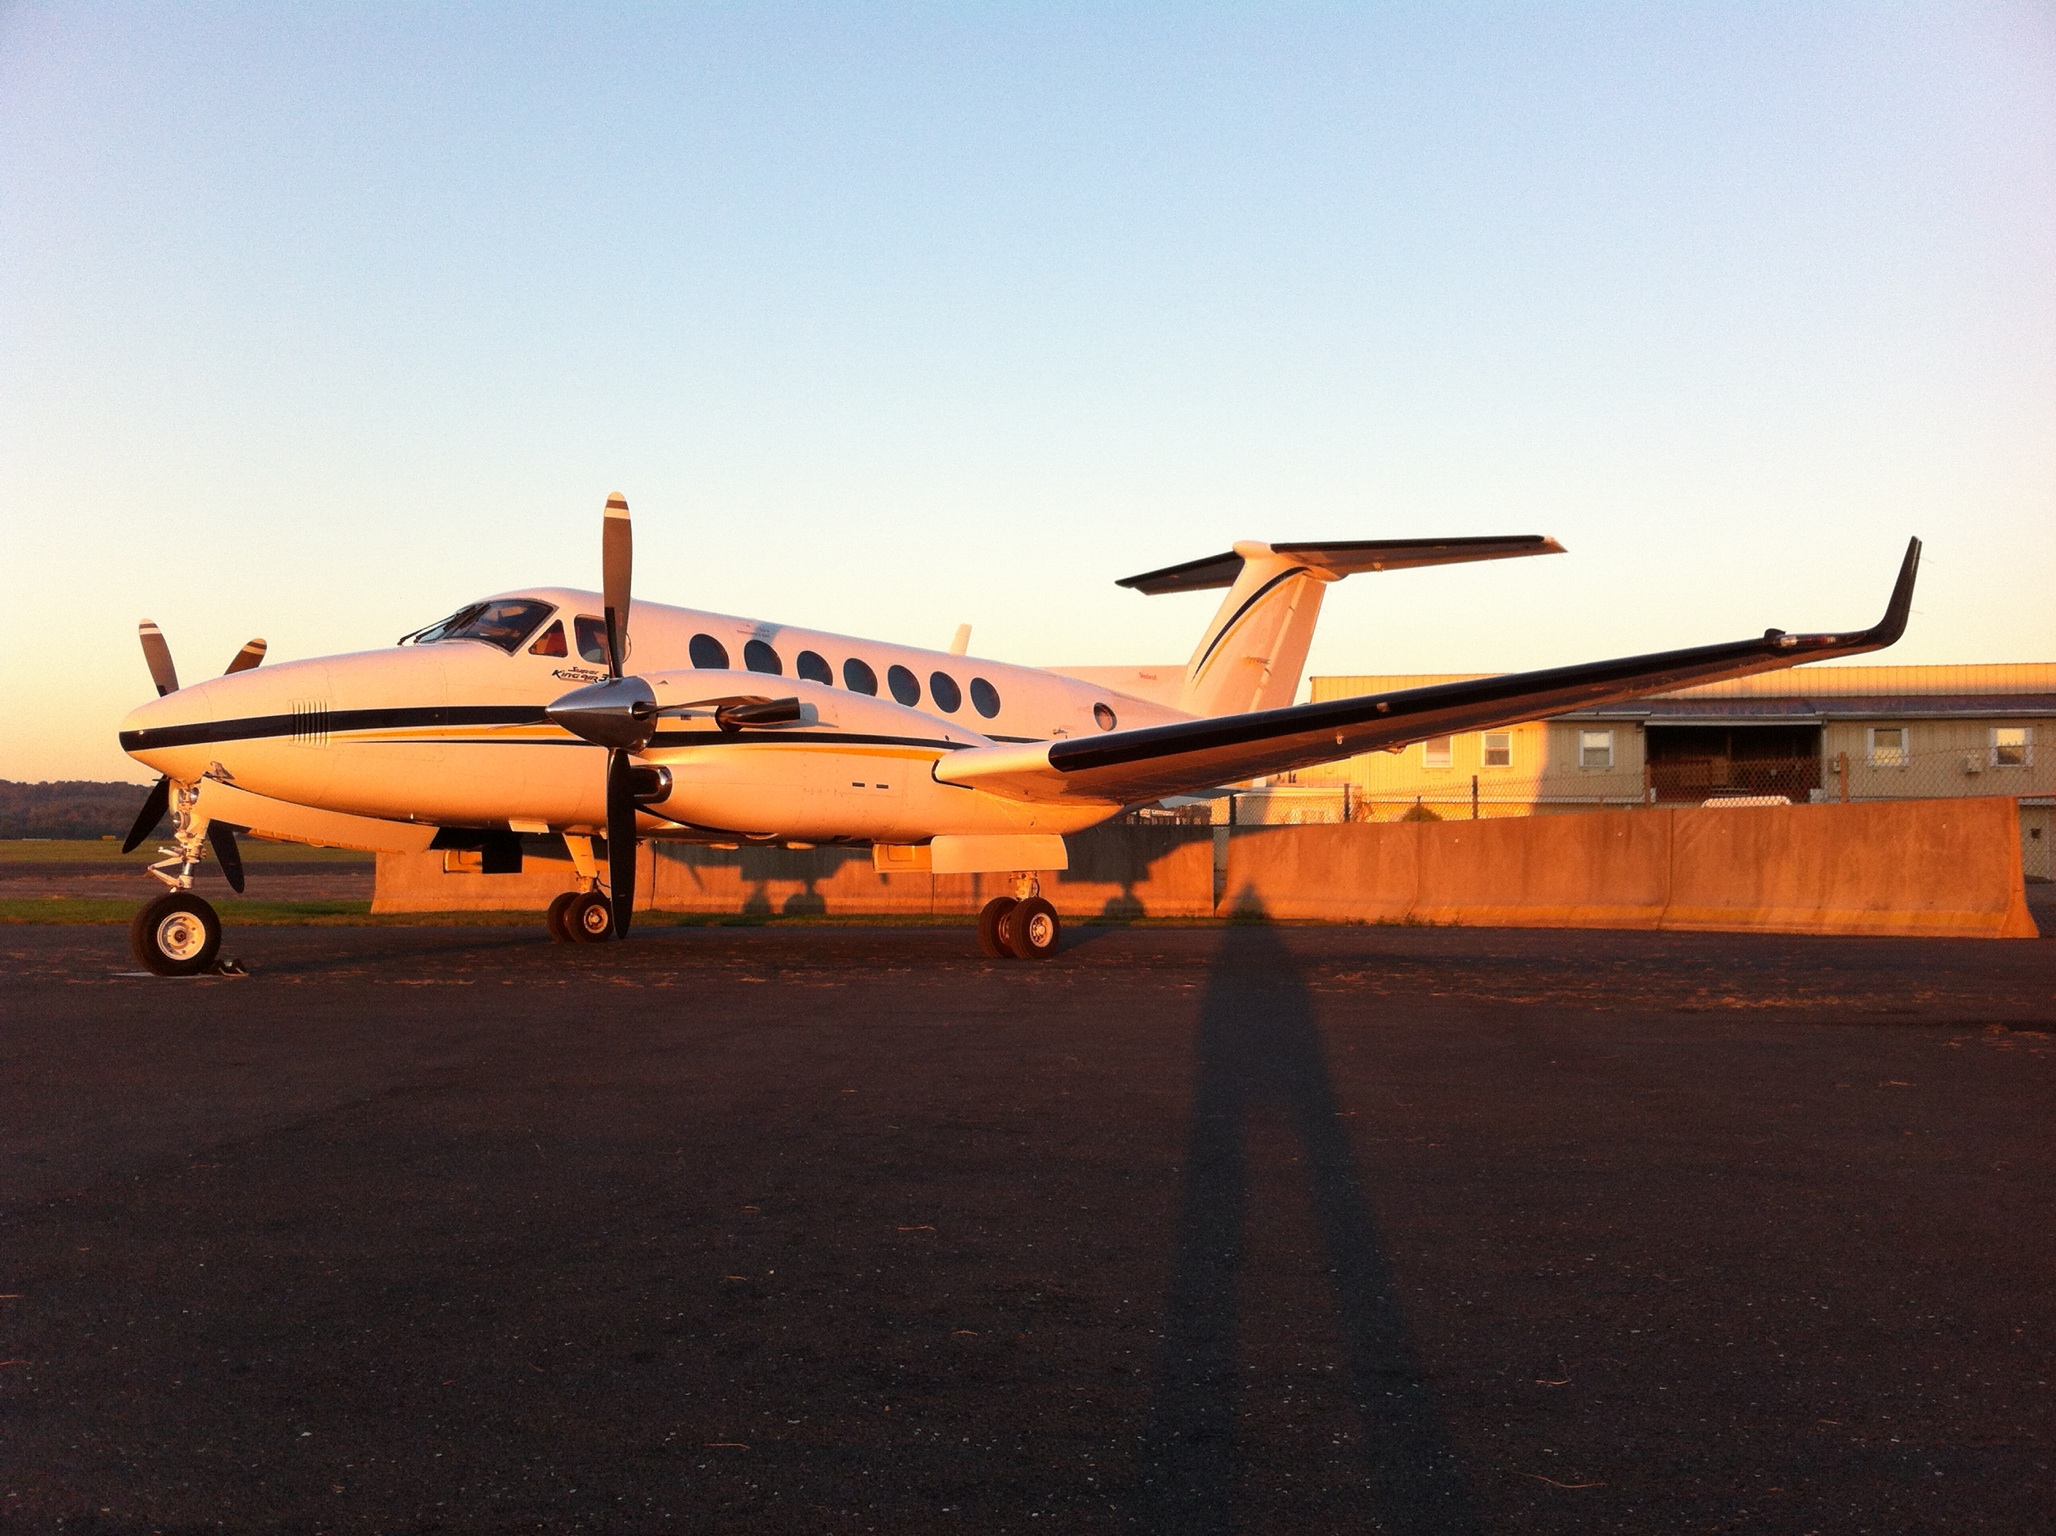 An image of a small plane sitting on an airport's tarmac at sunset